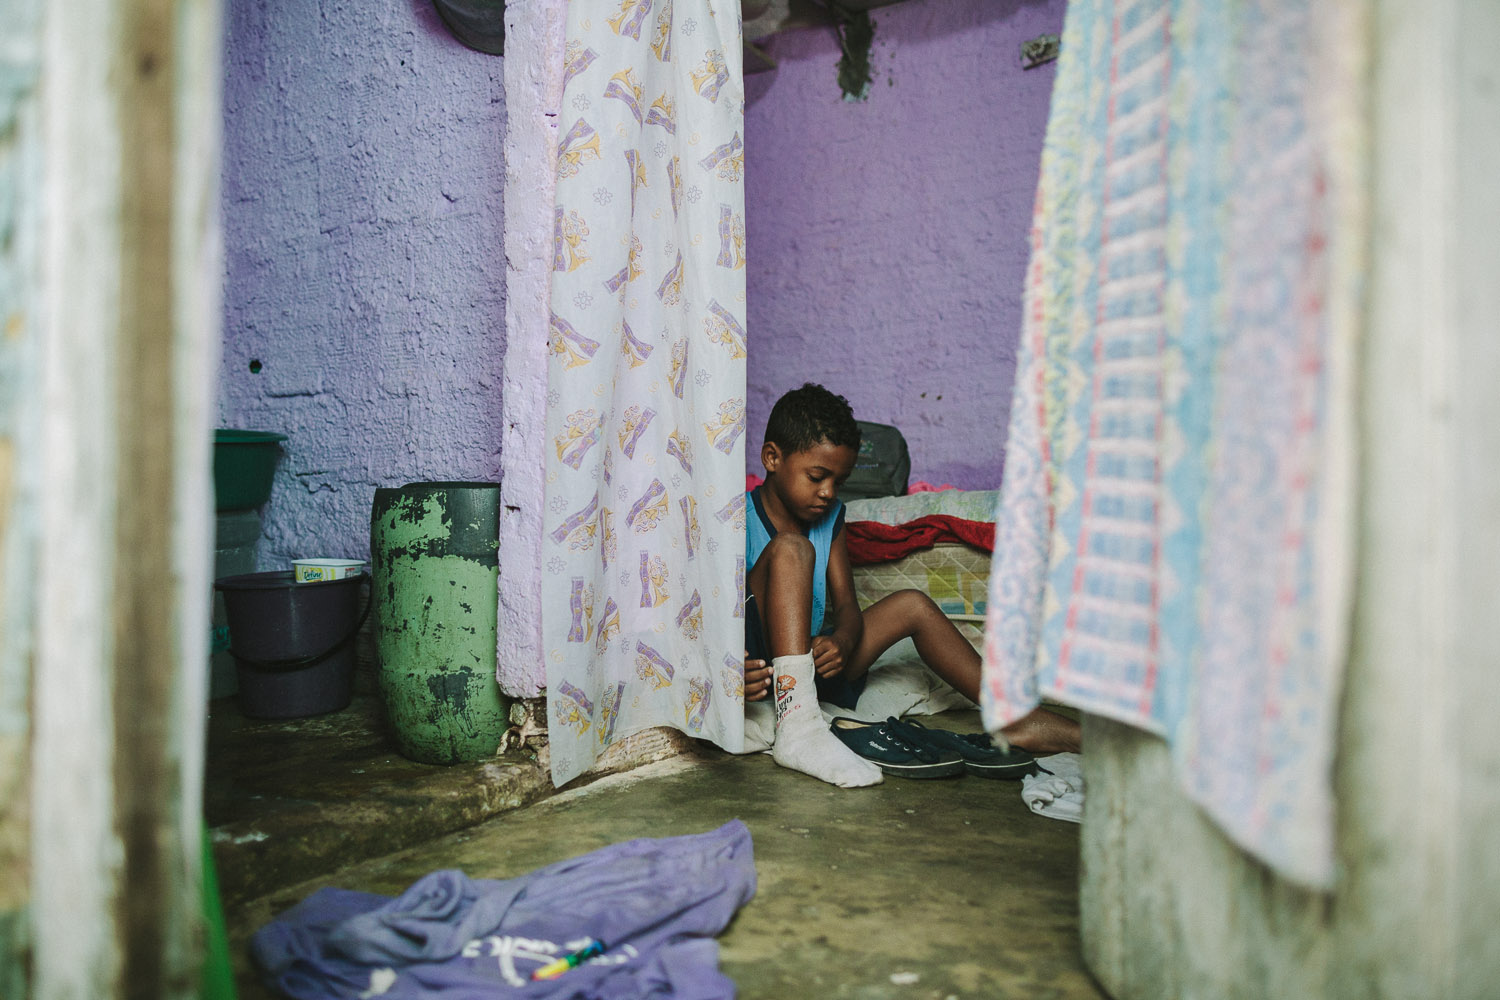   Emidio's entire house (housing 4 people---soon to be 5) is perhaps no larger than 8 feet by 10 feet. This is Emidio's morning routine before heading to classes at the Compassion Center.  